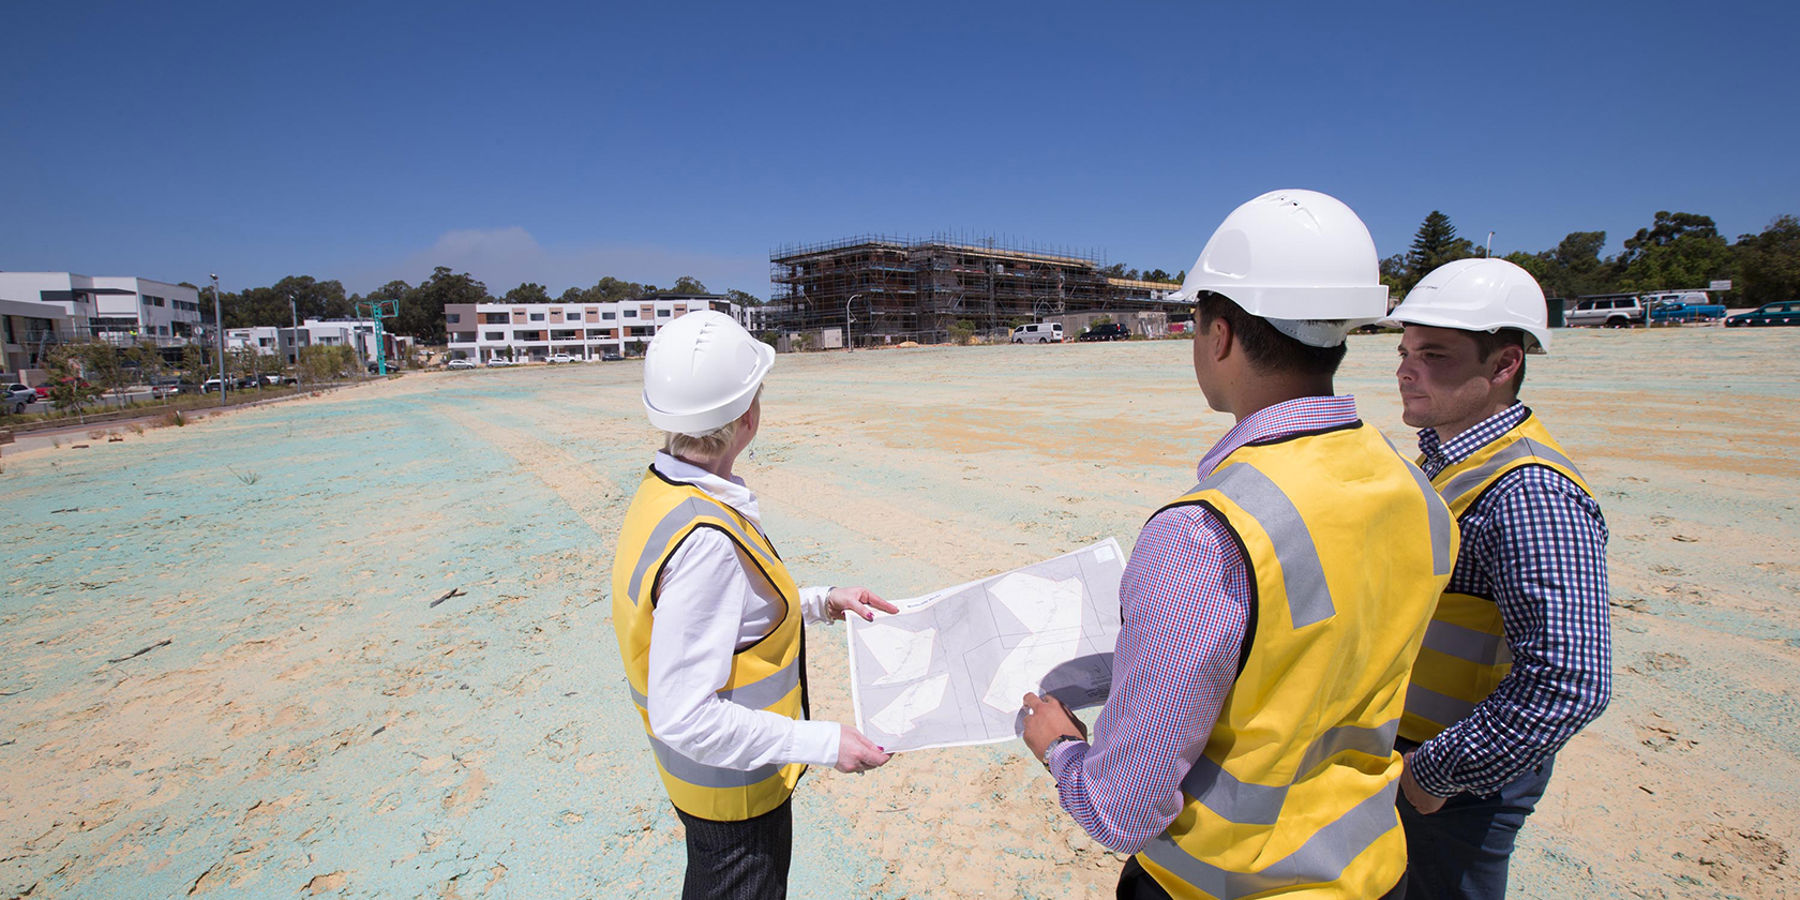 Three people in high-visibility clothing and construction hats looking at plans on a construction site.